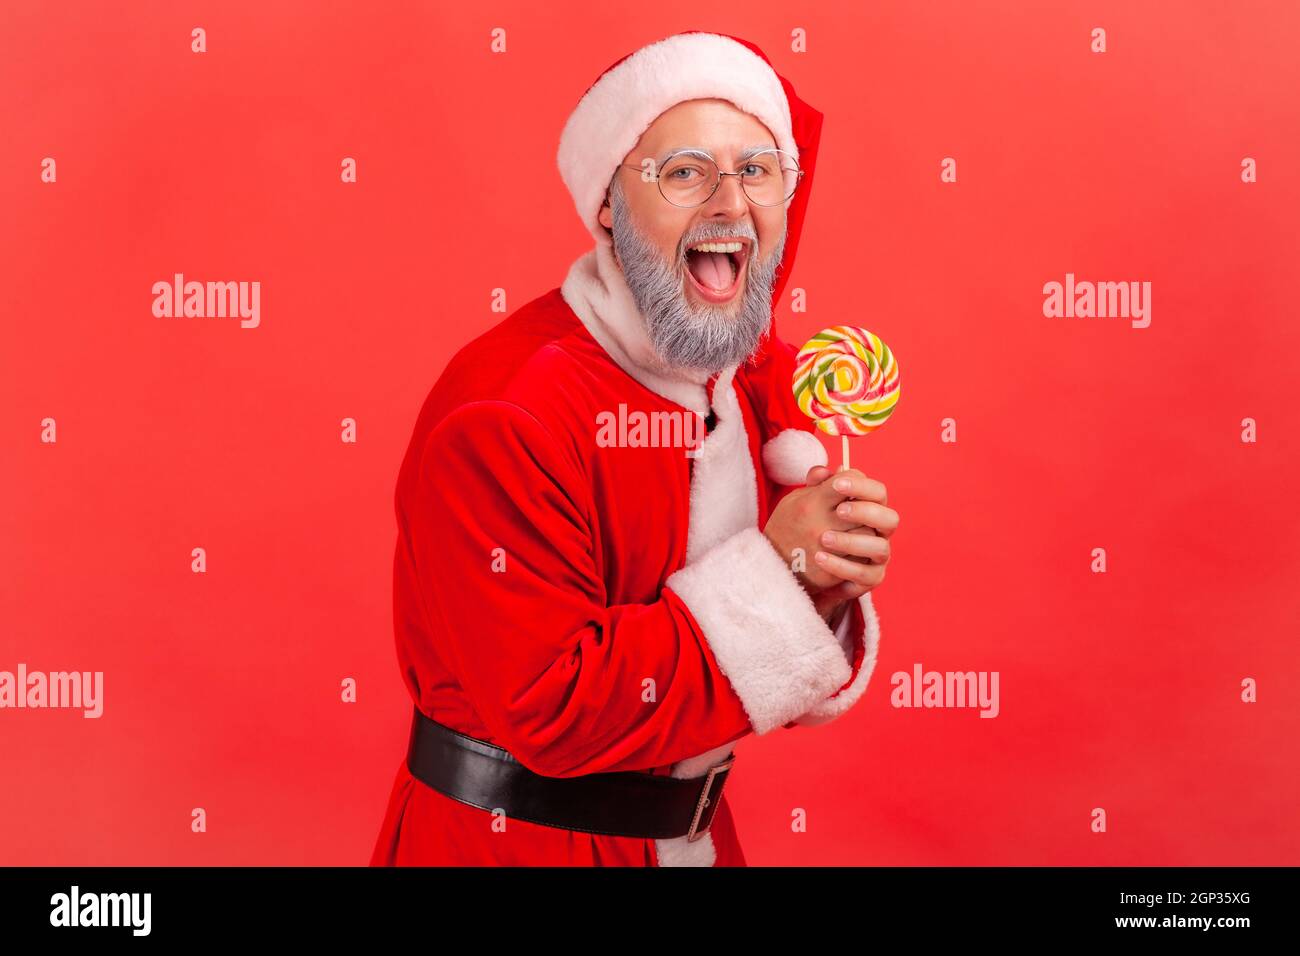 Portrait of happy amazed smiling elderly man with gray beard wearing santa claus costume standing with sugary lollypop in hands, looking at camera. Indoor studio shot isolated on red background. Stock Photo